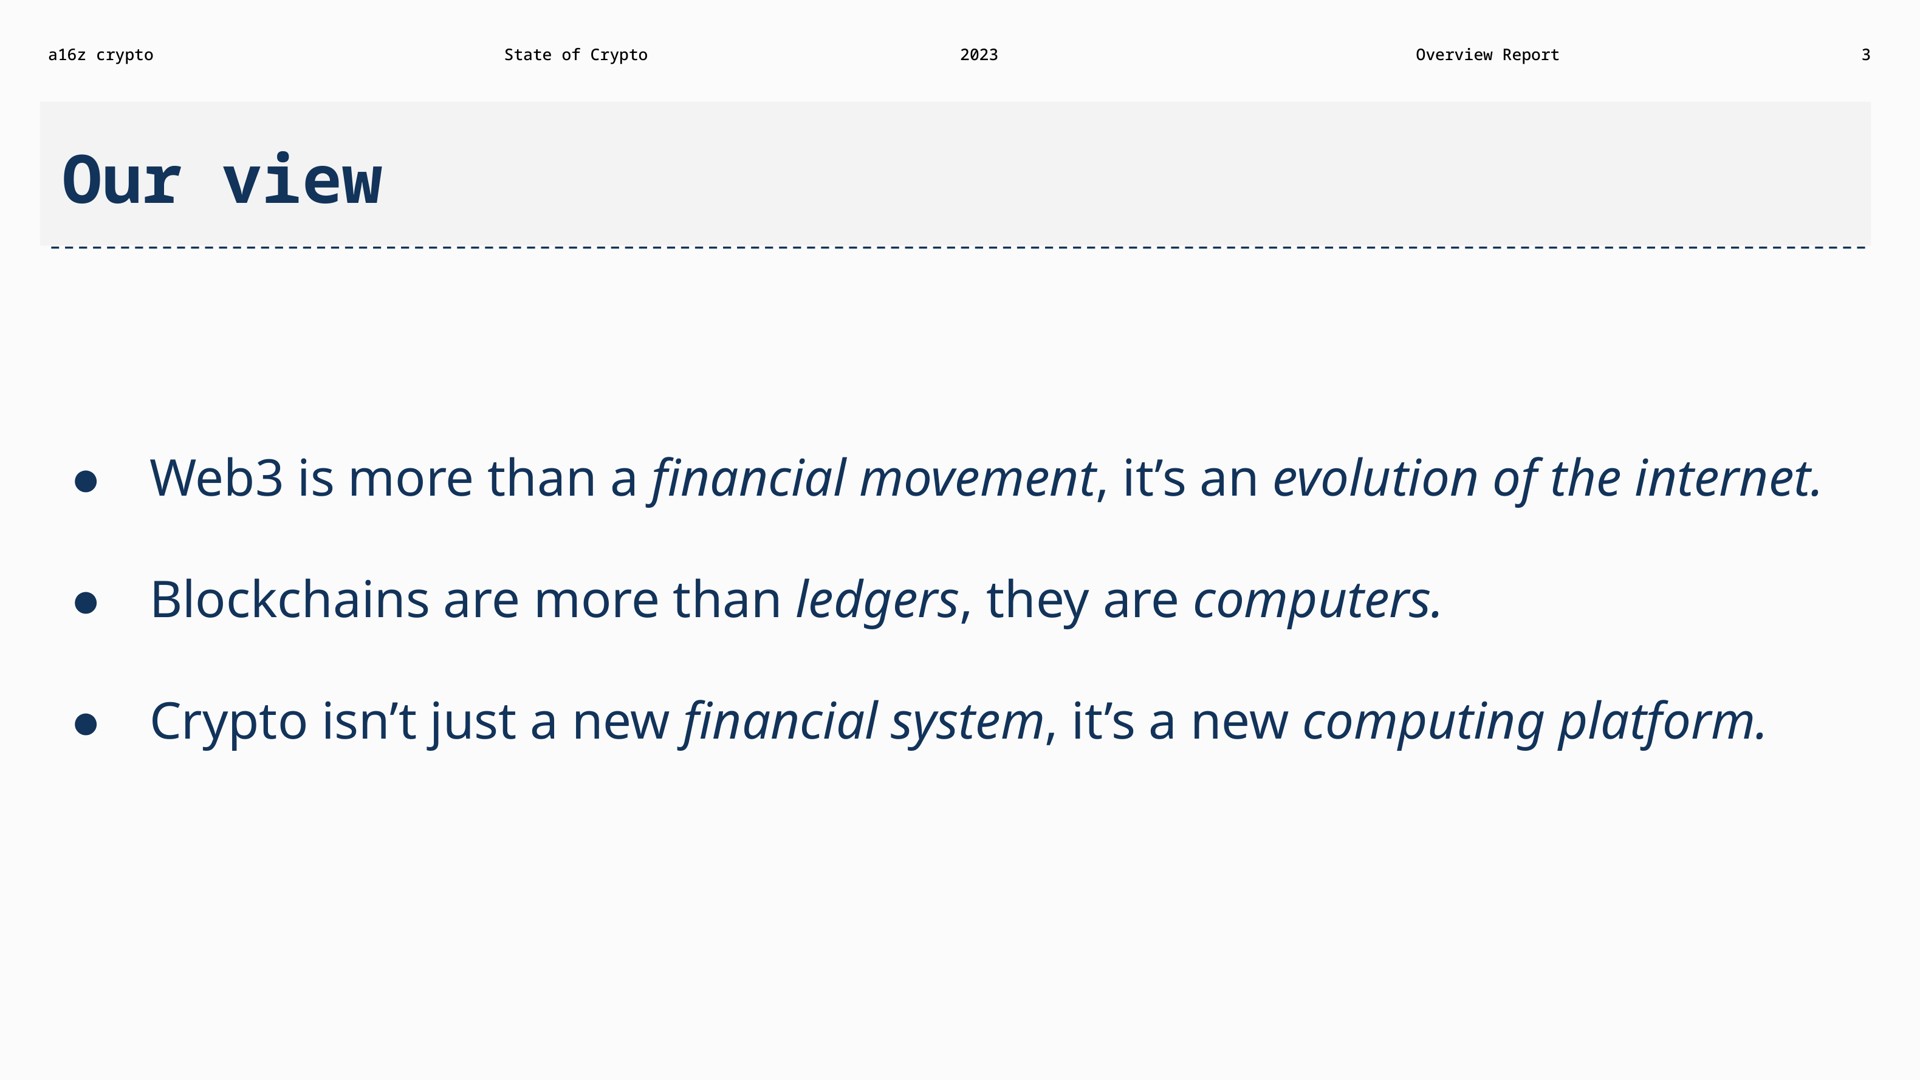 our view web is more than a movement it an evolution of the are more than ledgers they are computers just a new system it a new computing platform financial financial anew | a16z